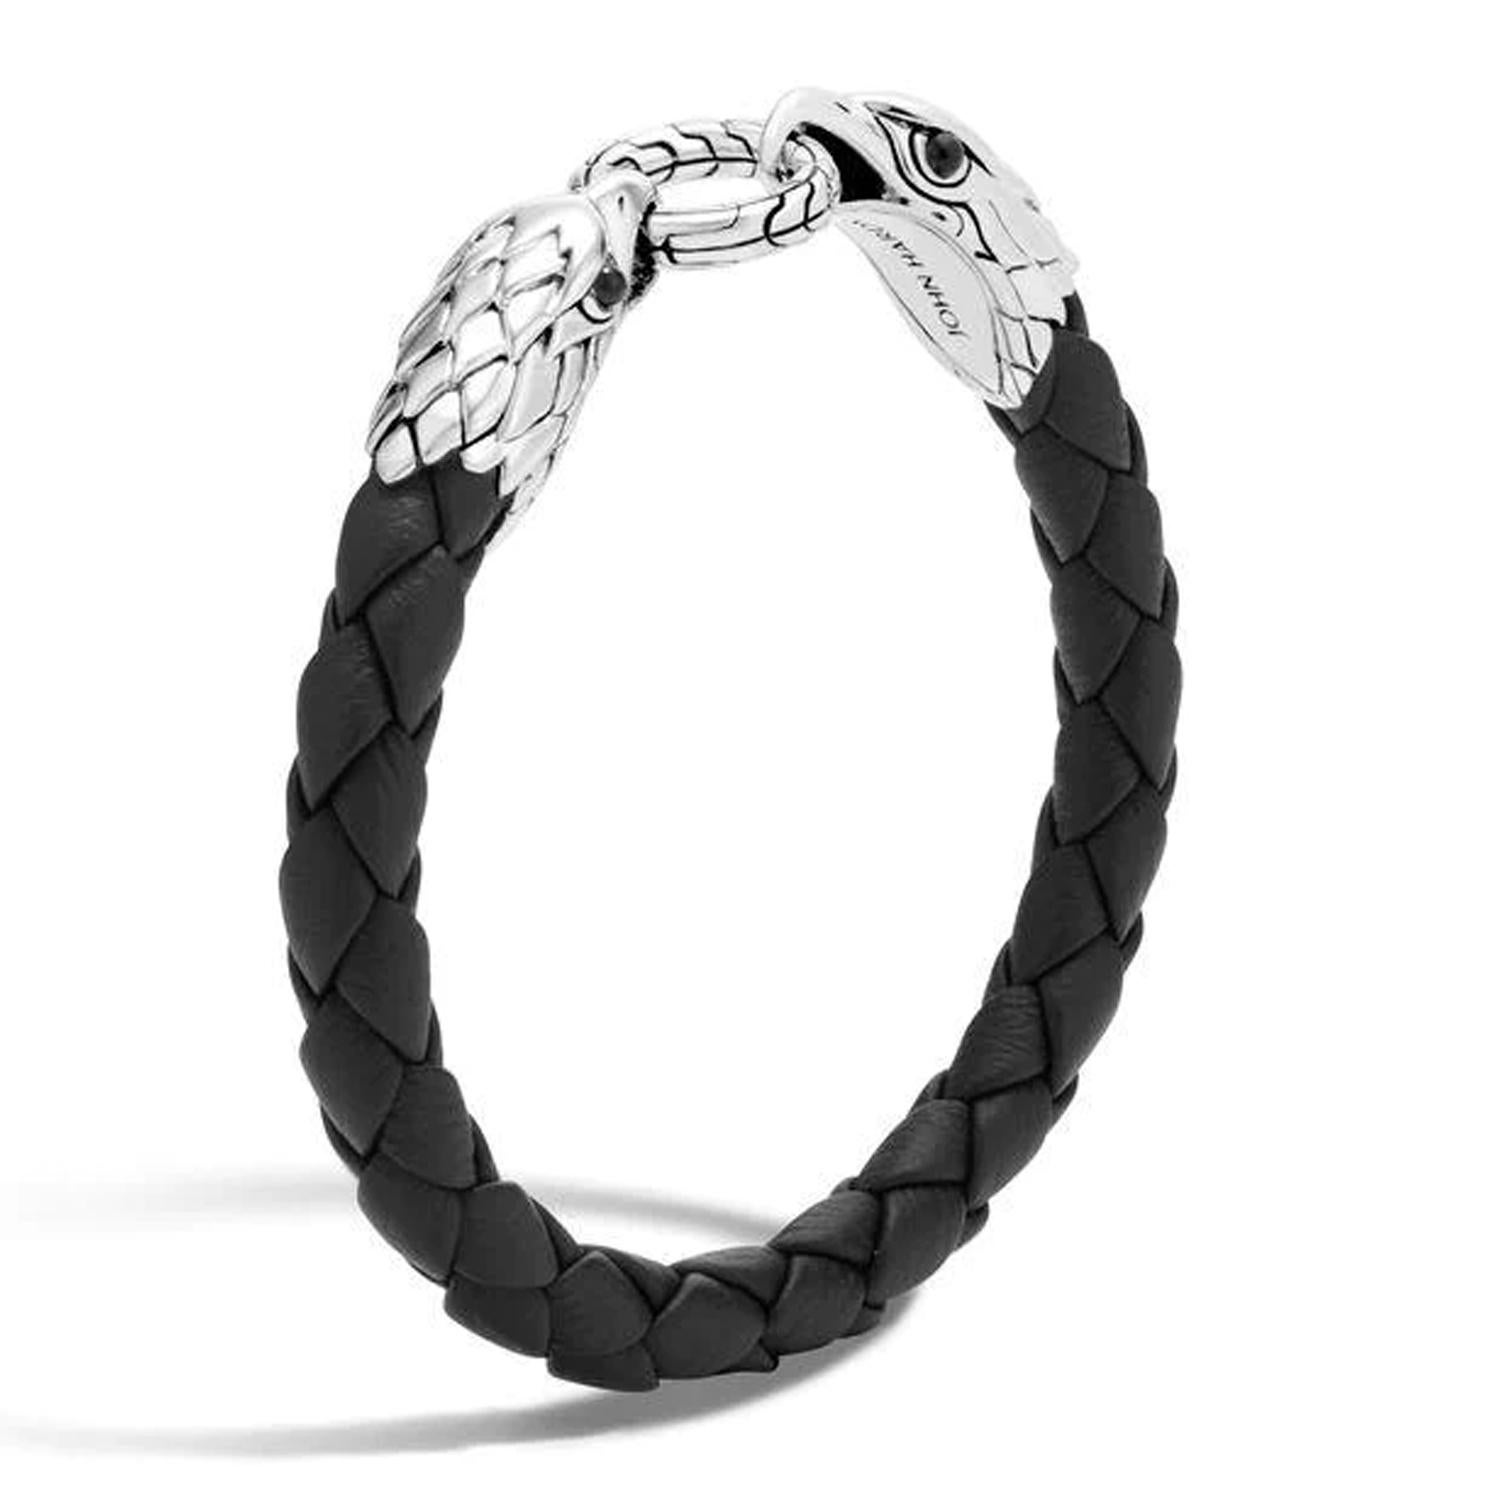 Powerful, dramatic and inspiring, John Hardy's Bali-inspired, artisan-crafted fine jewelry collections embody the pinnacle craftsmanship and quality.

The bracelet measure 7 1/2